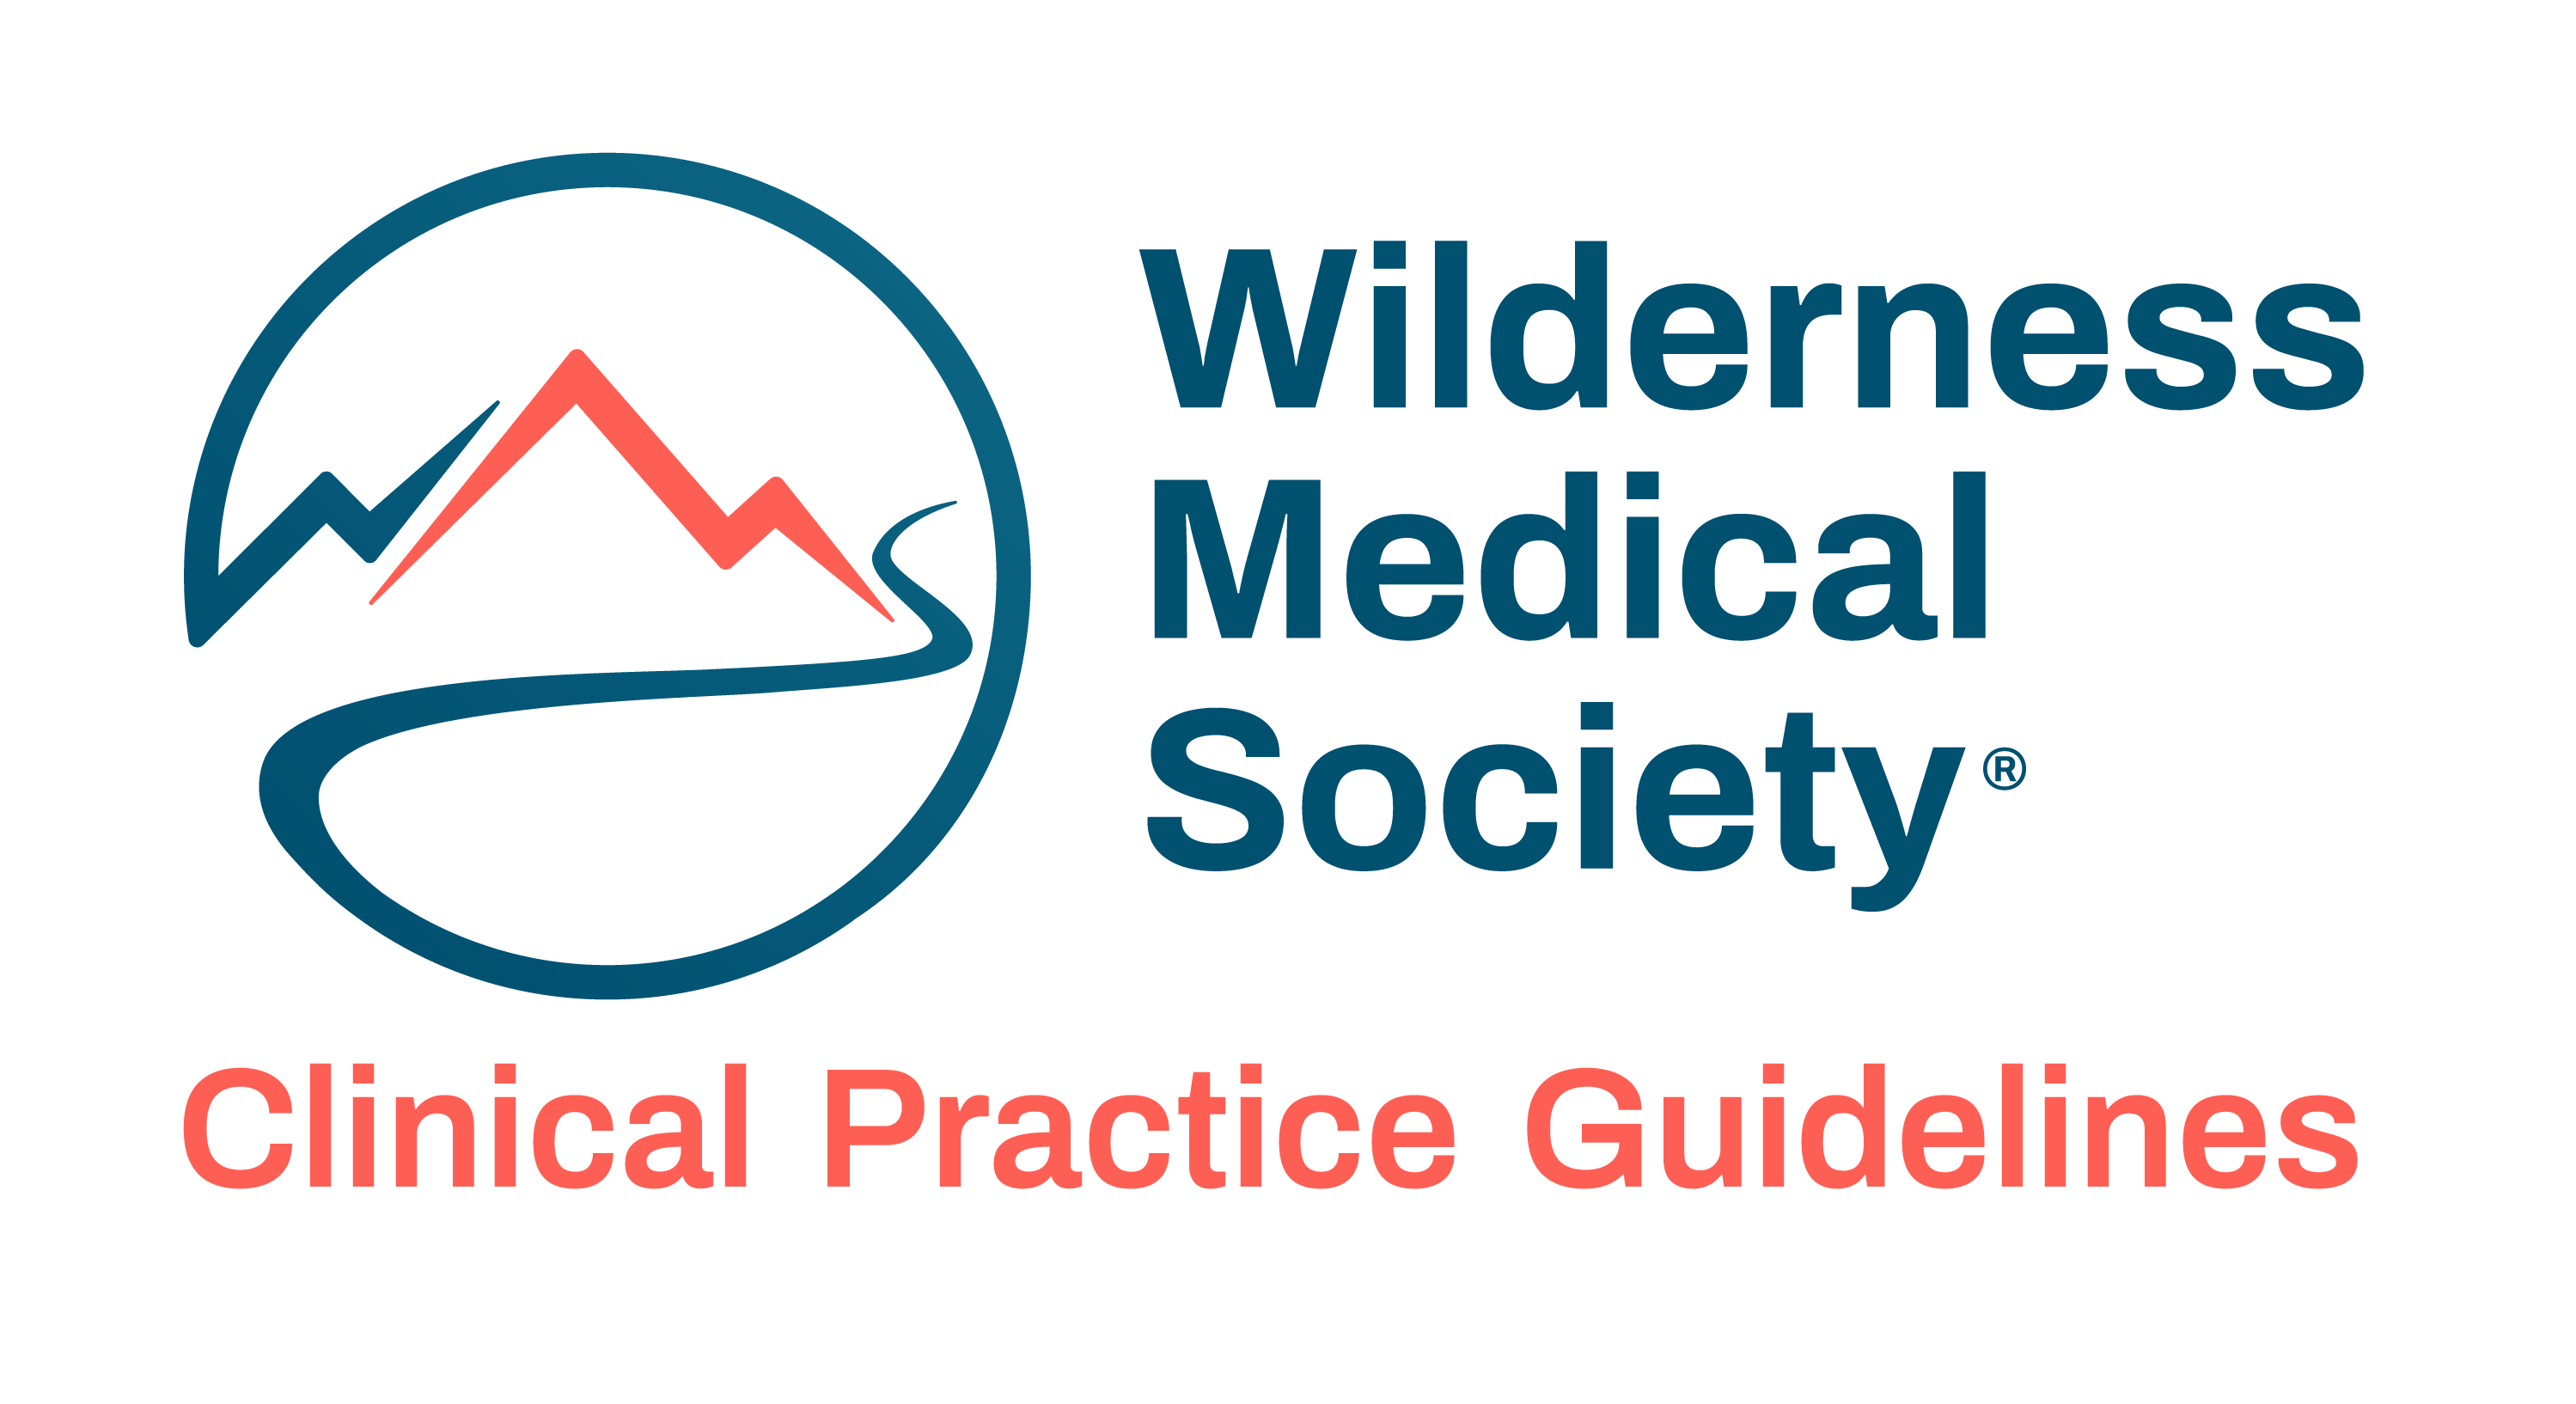 WMS logo with Clinical Practice Guidelines under it